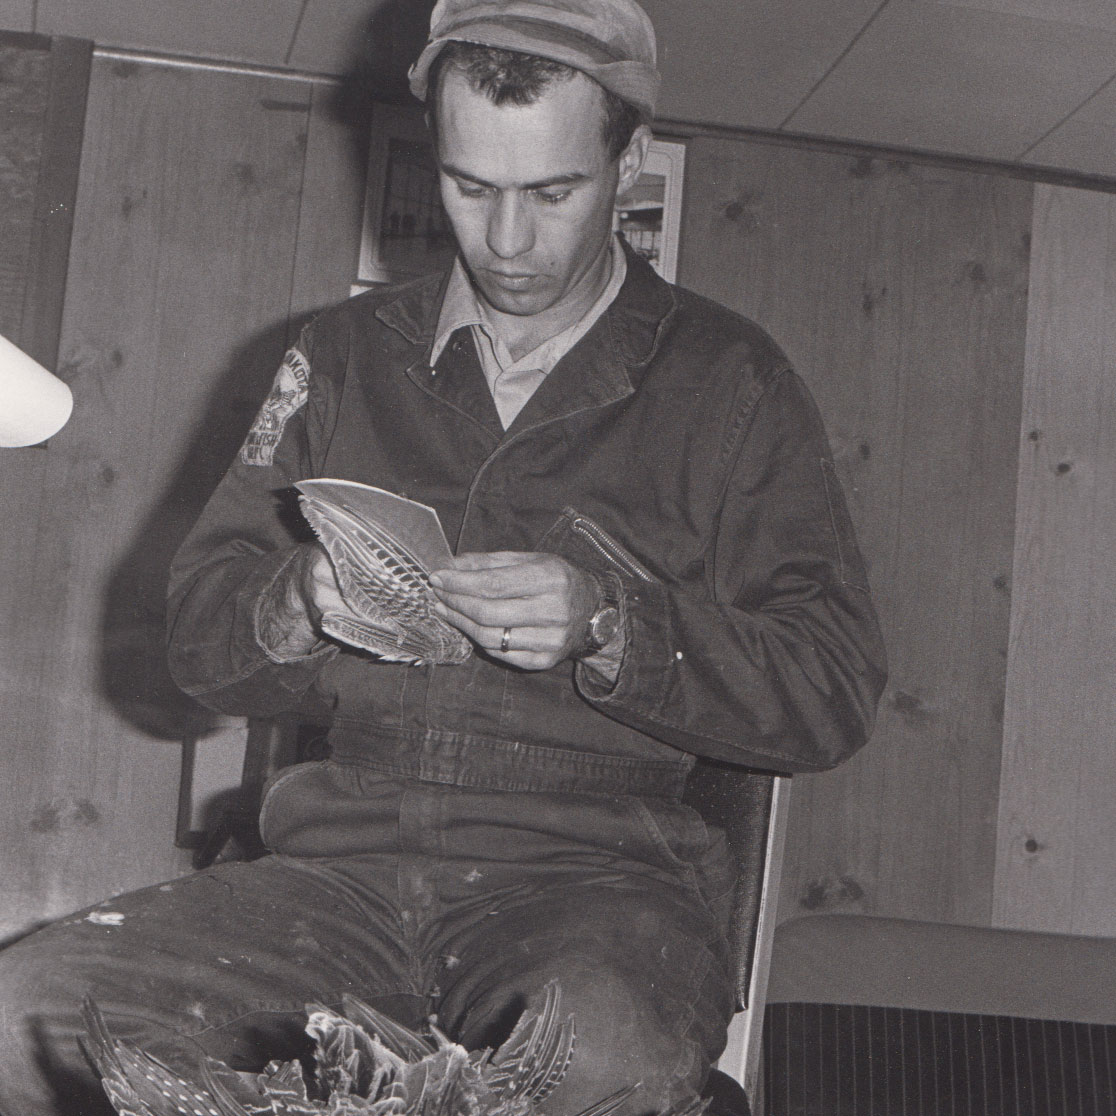 Younger Jerry Kobridger doing a wing survey